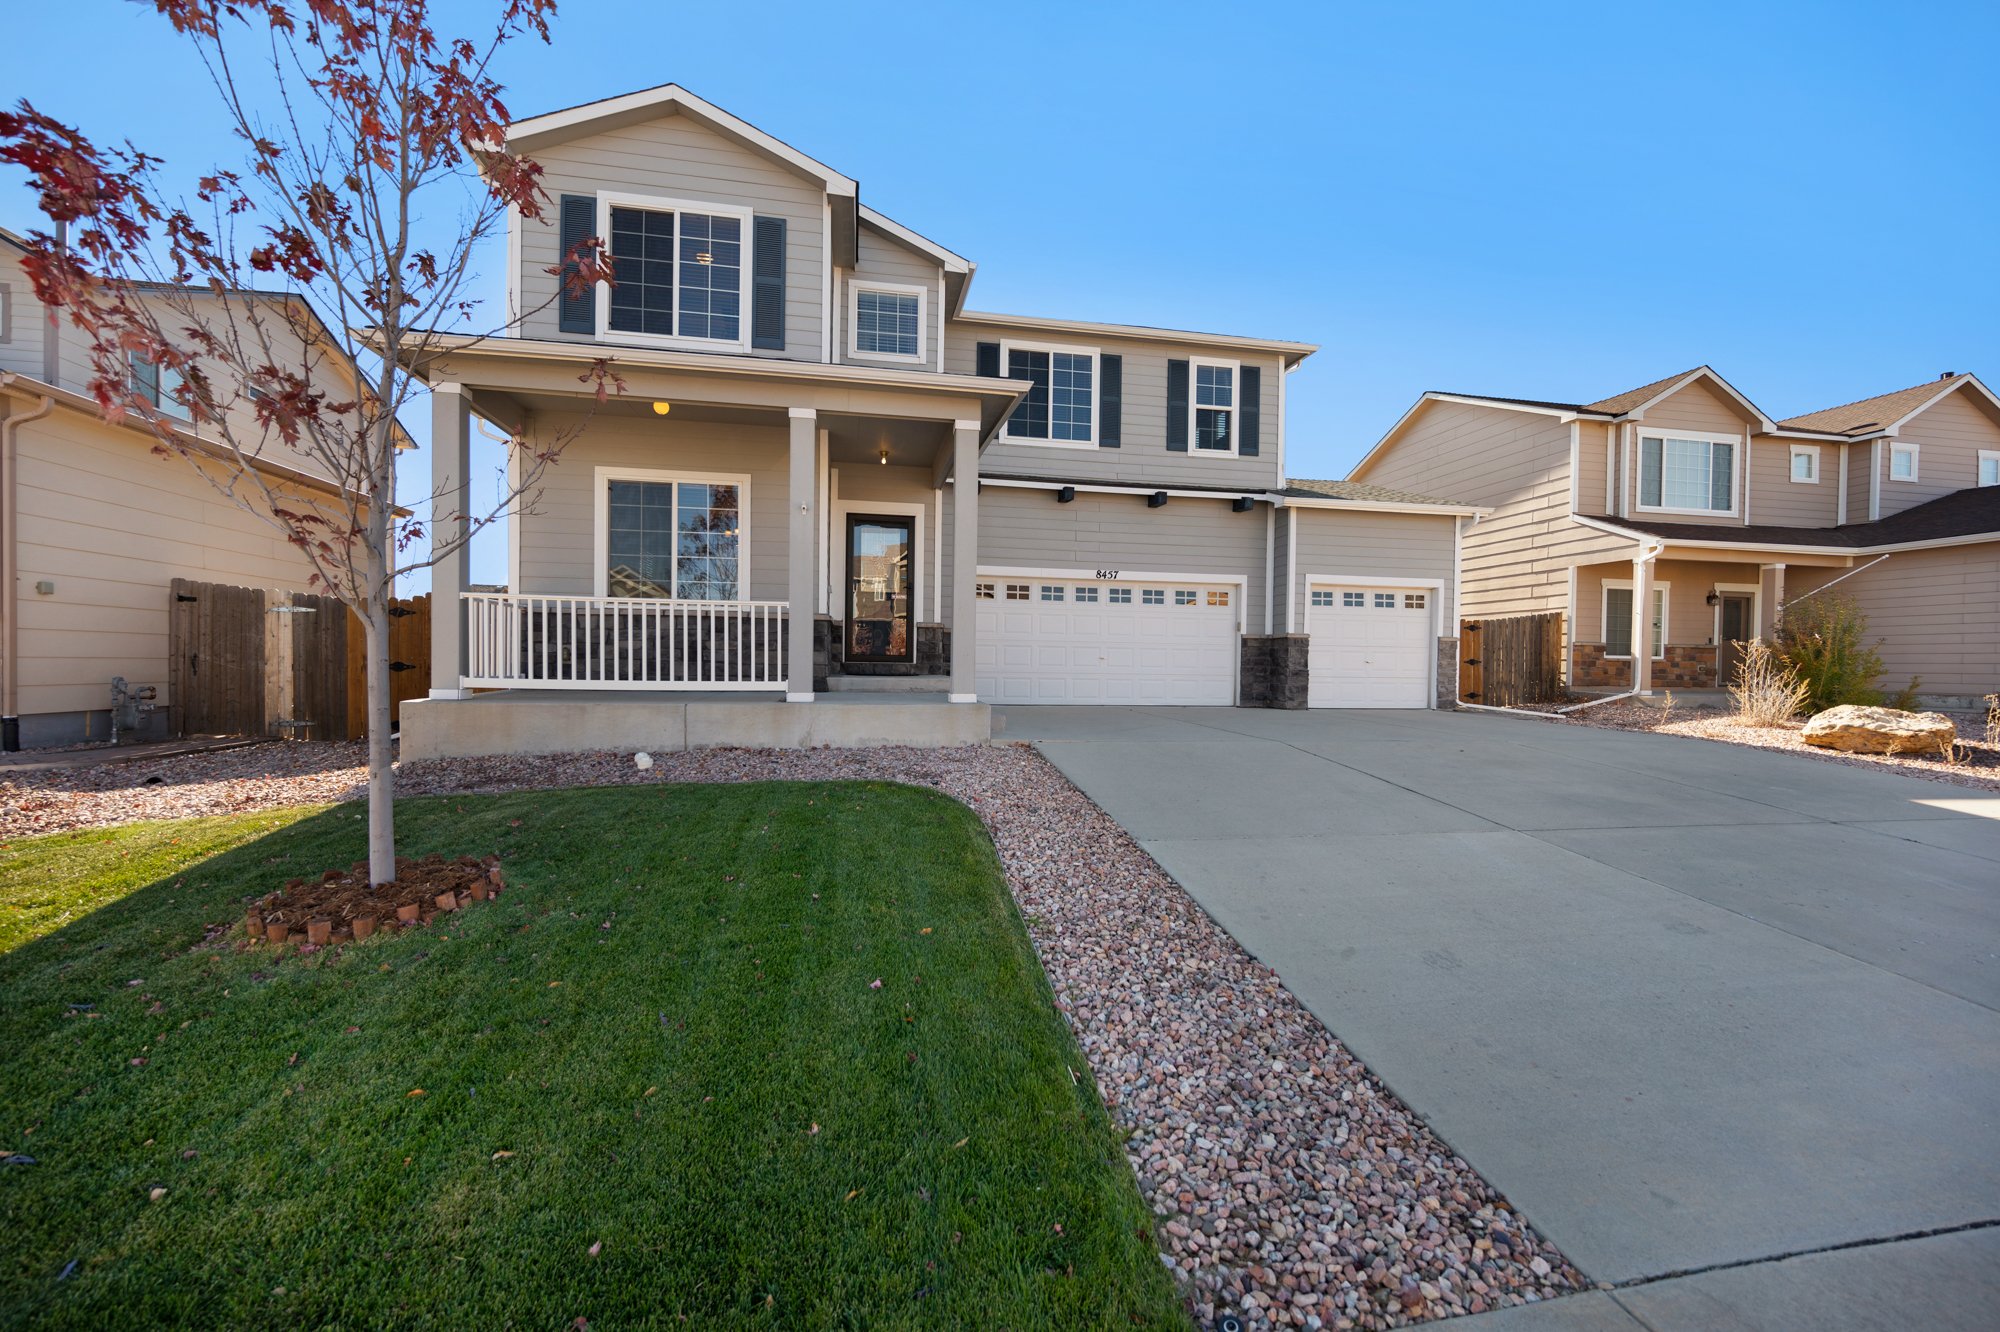 8457 Chasewood Loop, Colorado Springs, CO 80908, USA Photo 1